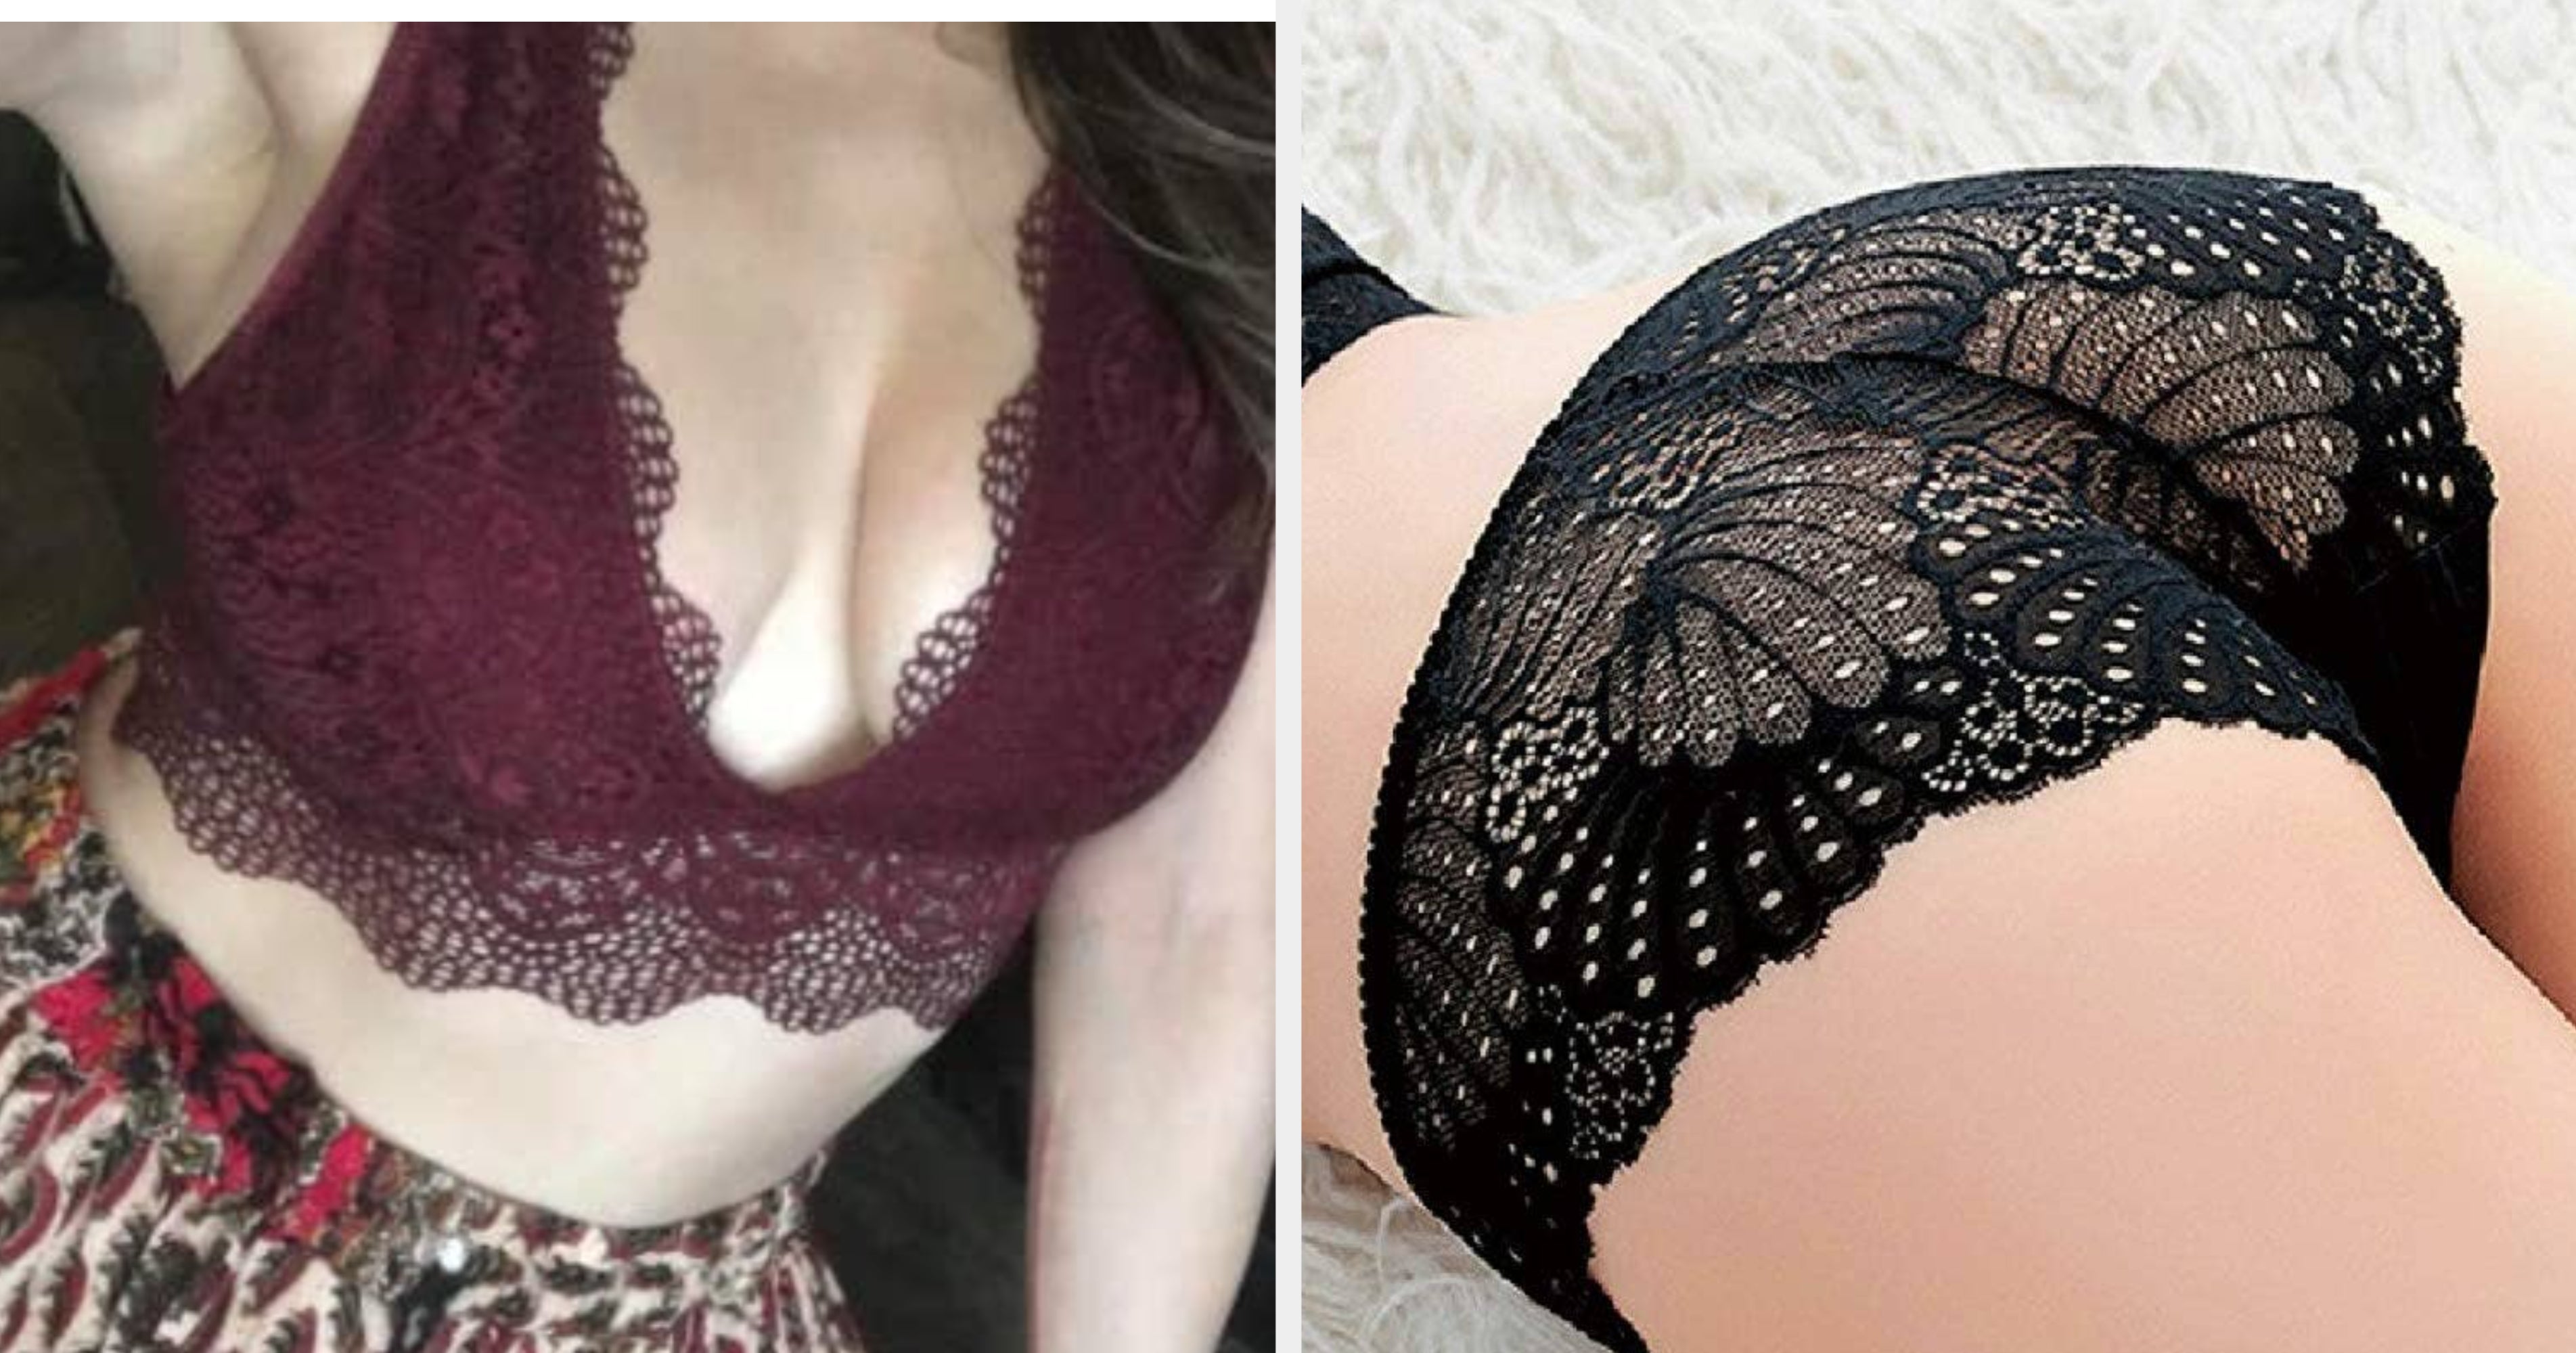 44 Pieces Of Sexy Lingerie That's Still Comfortable